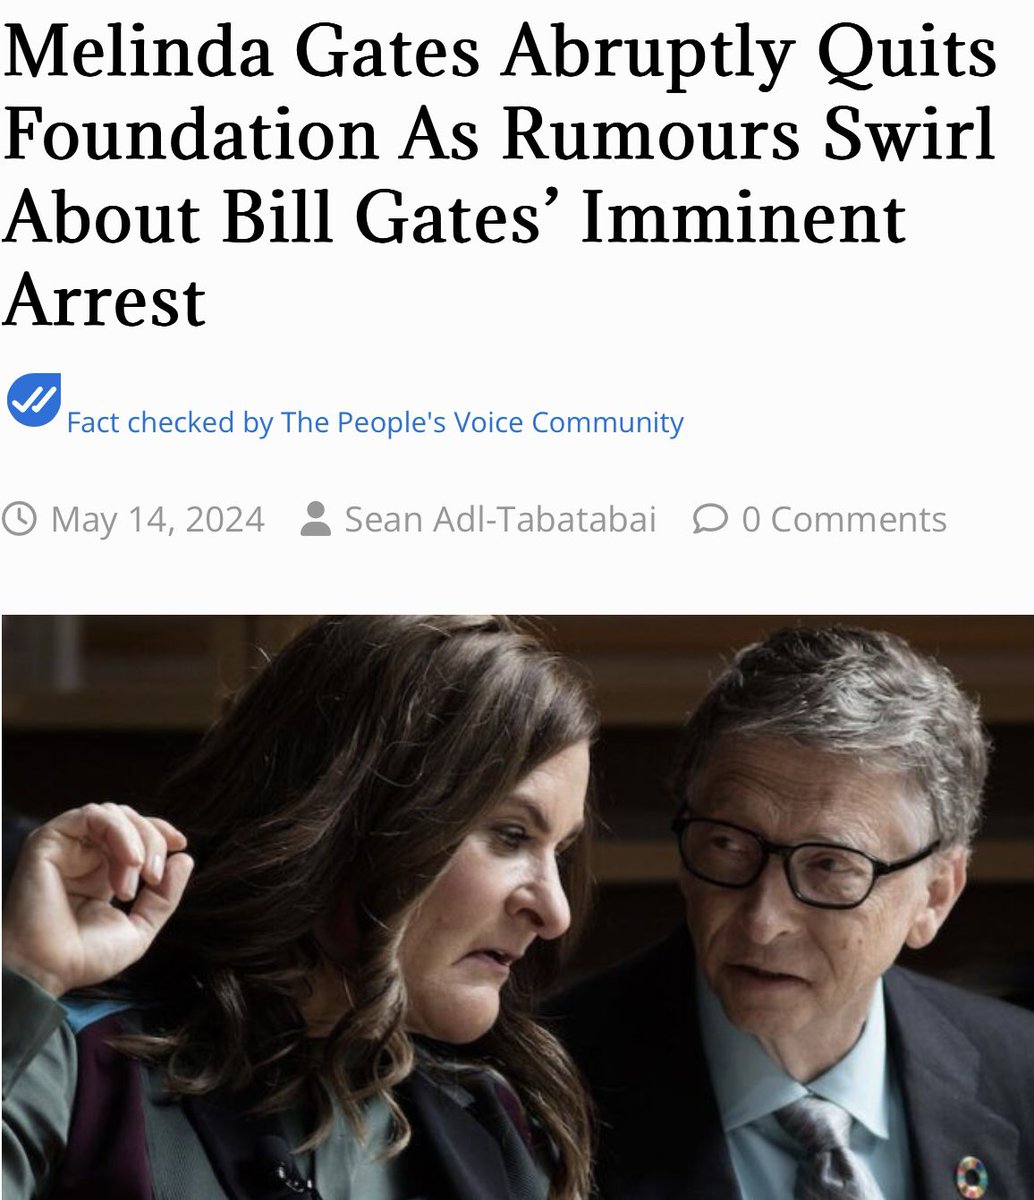 Melinda Gates announced on Monday that she is quitting the Bill & Melinda Gates Foundation. The abrupt announcement was made amid persistent rumors over the last several months that Bill Gates could be prosecuted for committing crimes against humanity during the COVID pandemic.